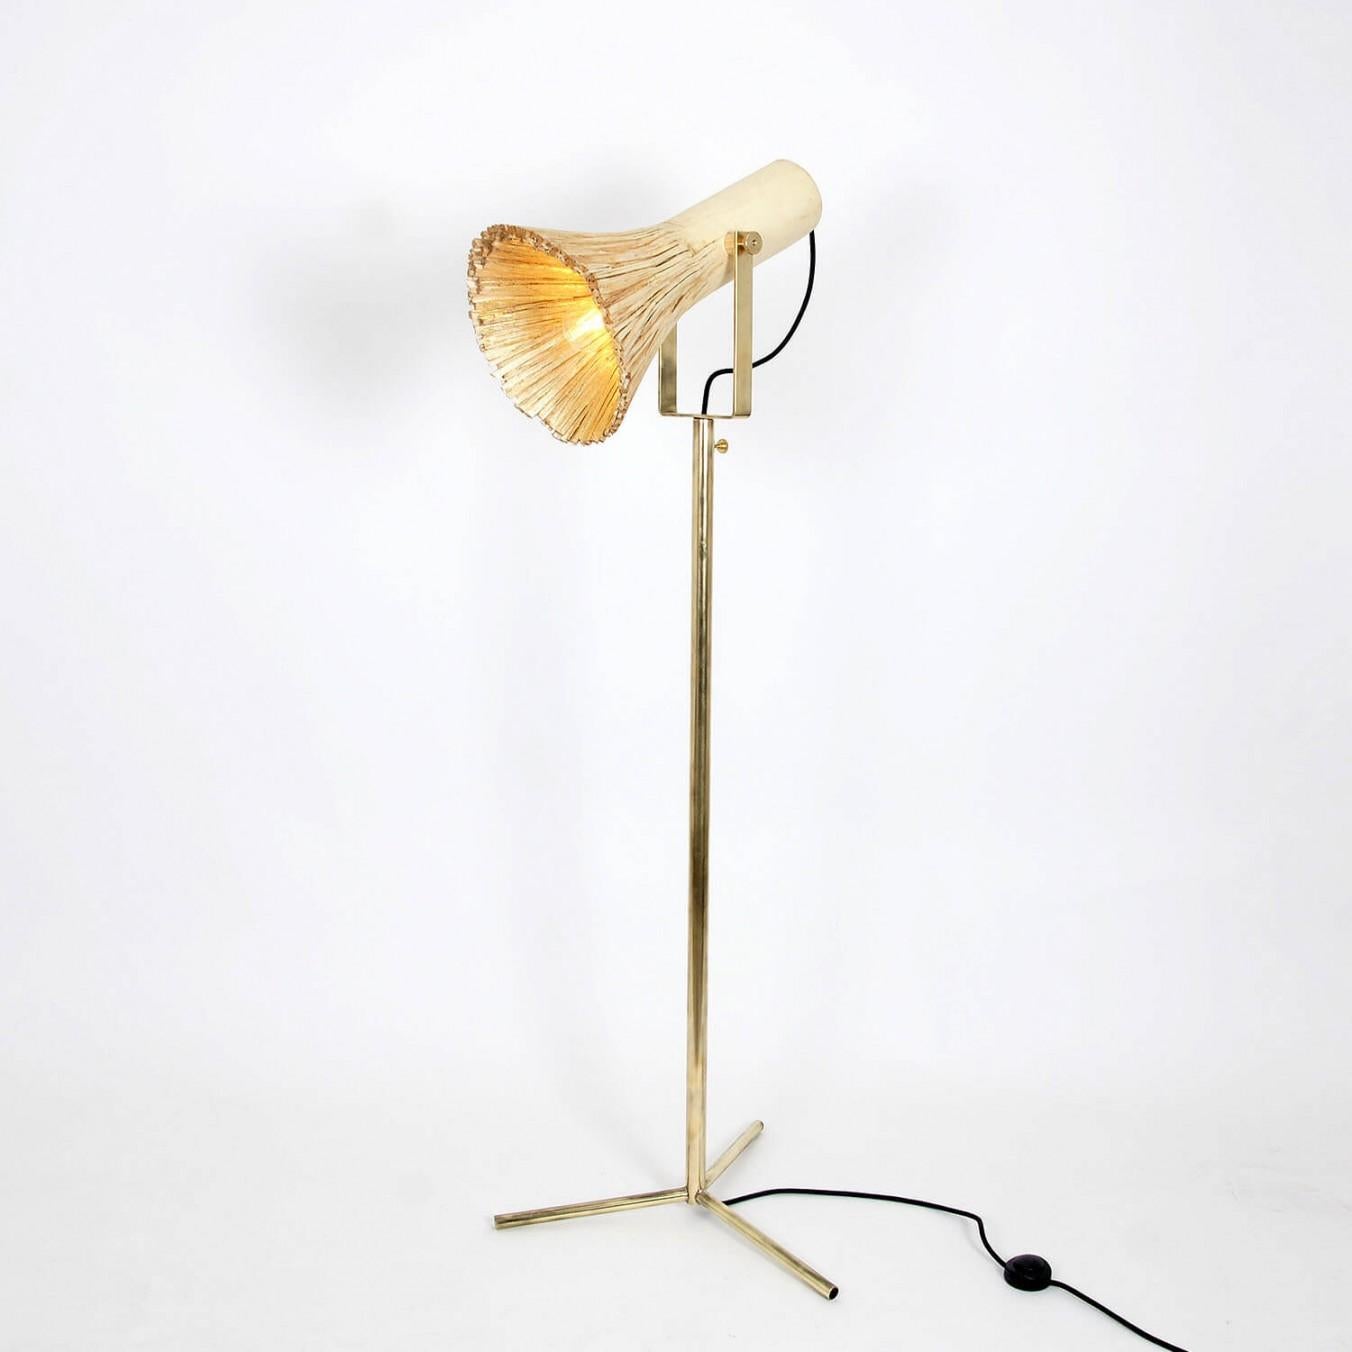 Contemporary wood and brass floor lamp - Pressed wood light natural by Johannes Hemann

Material: wood, brass
Light source: bulb E14, max 50 Watt
Dimensions: ø35 x H130 cm

The series „pressed wood black“ is based on the traditional technique